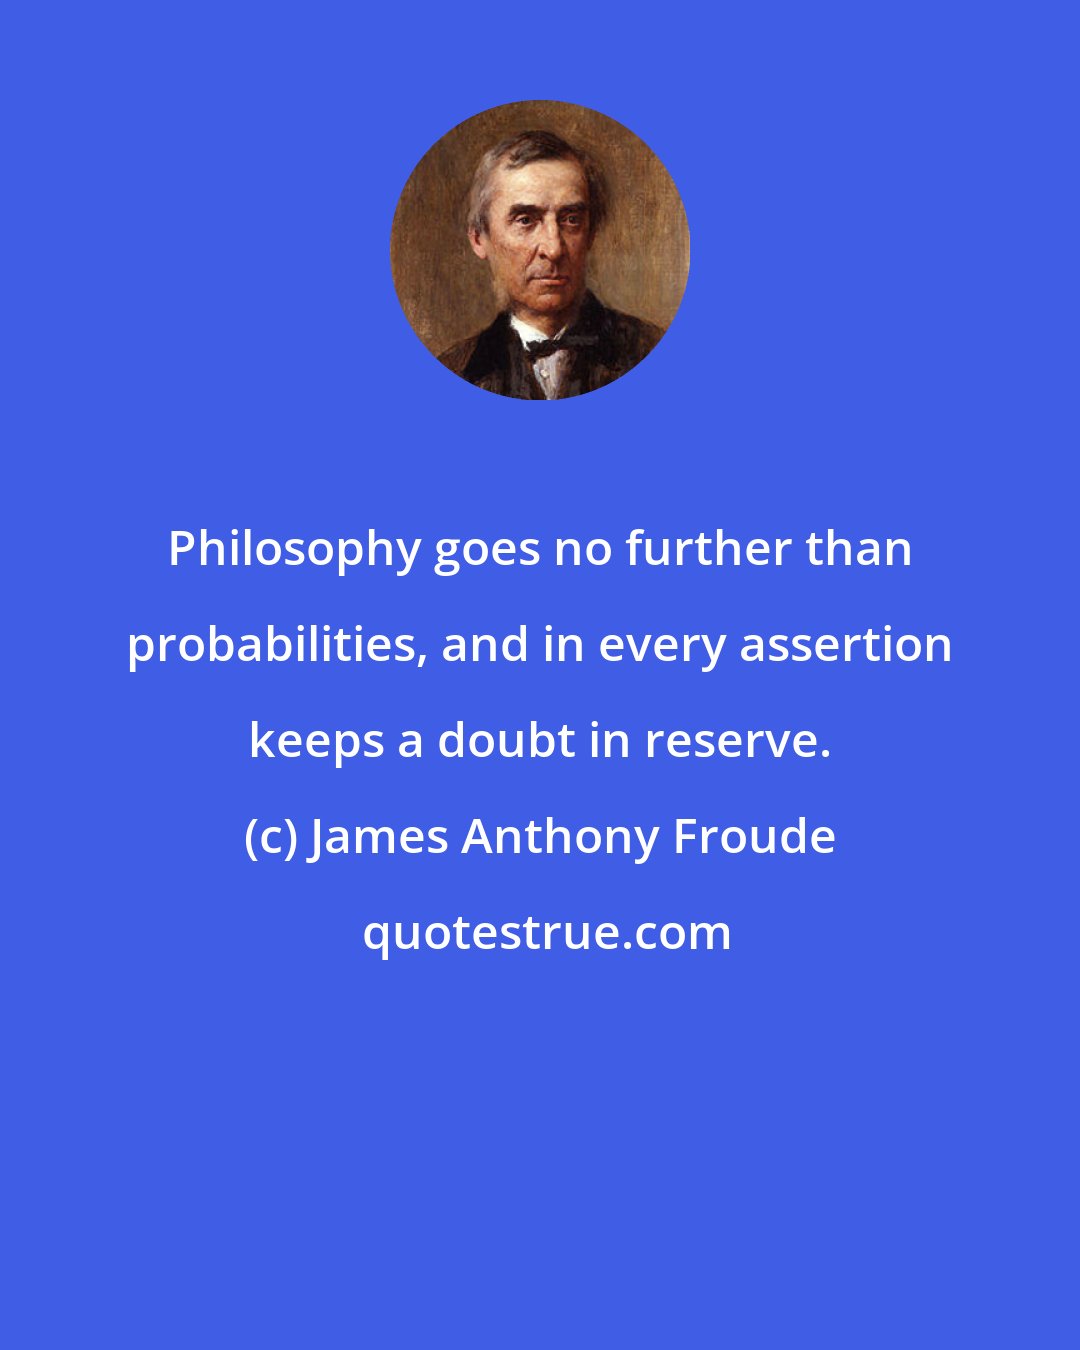 James Anthony Froude: Philosophy goes no further than probabilities, and in every assertion keeps a doubt in reserve.